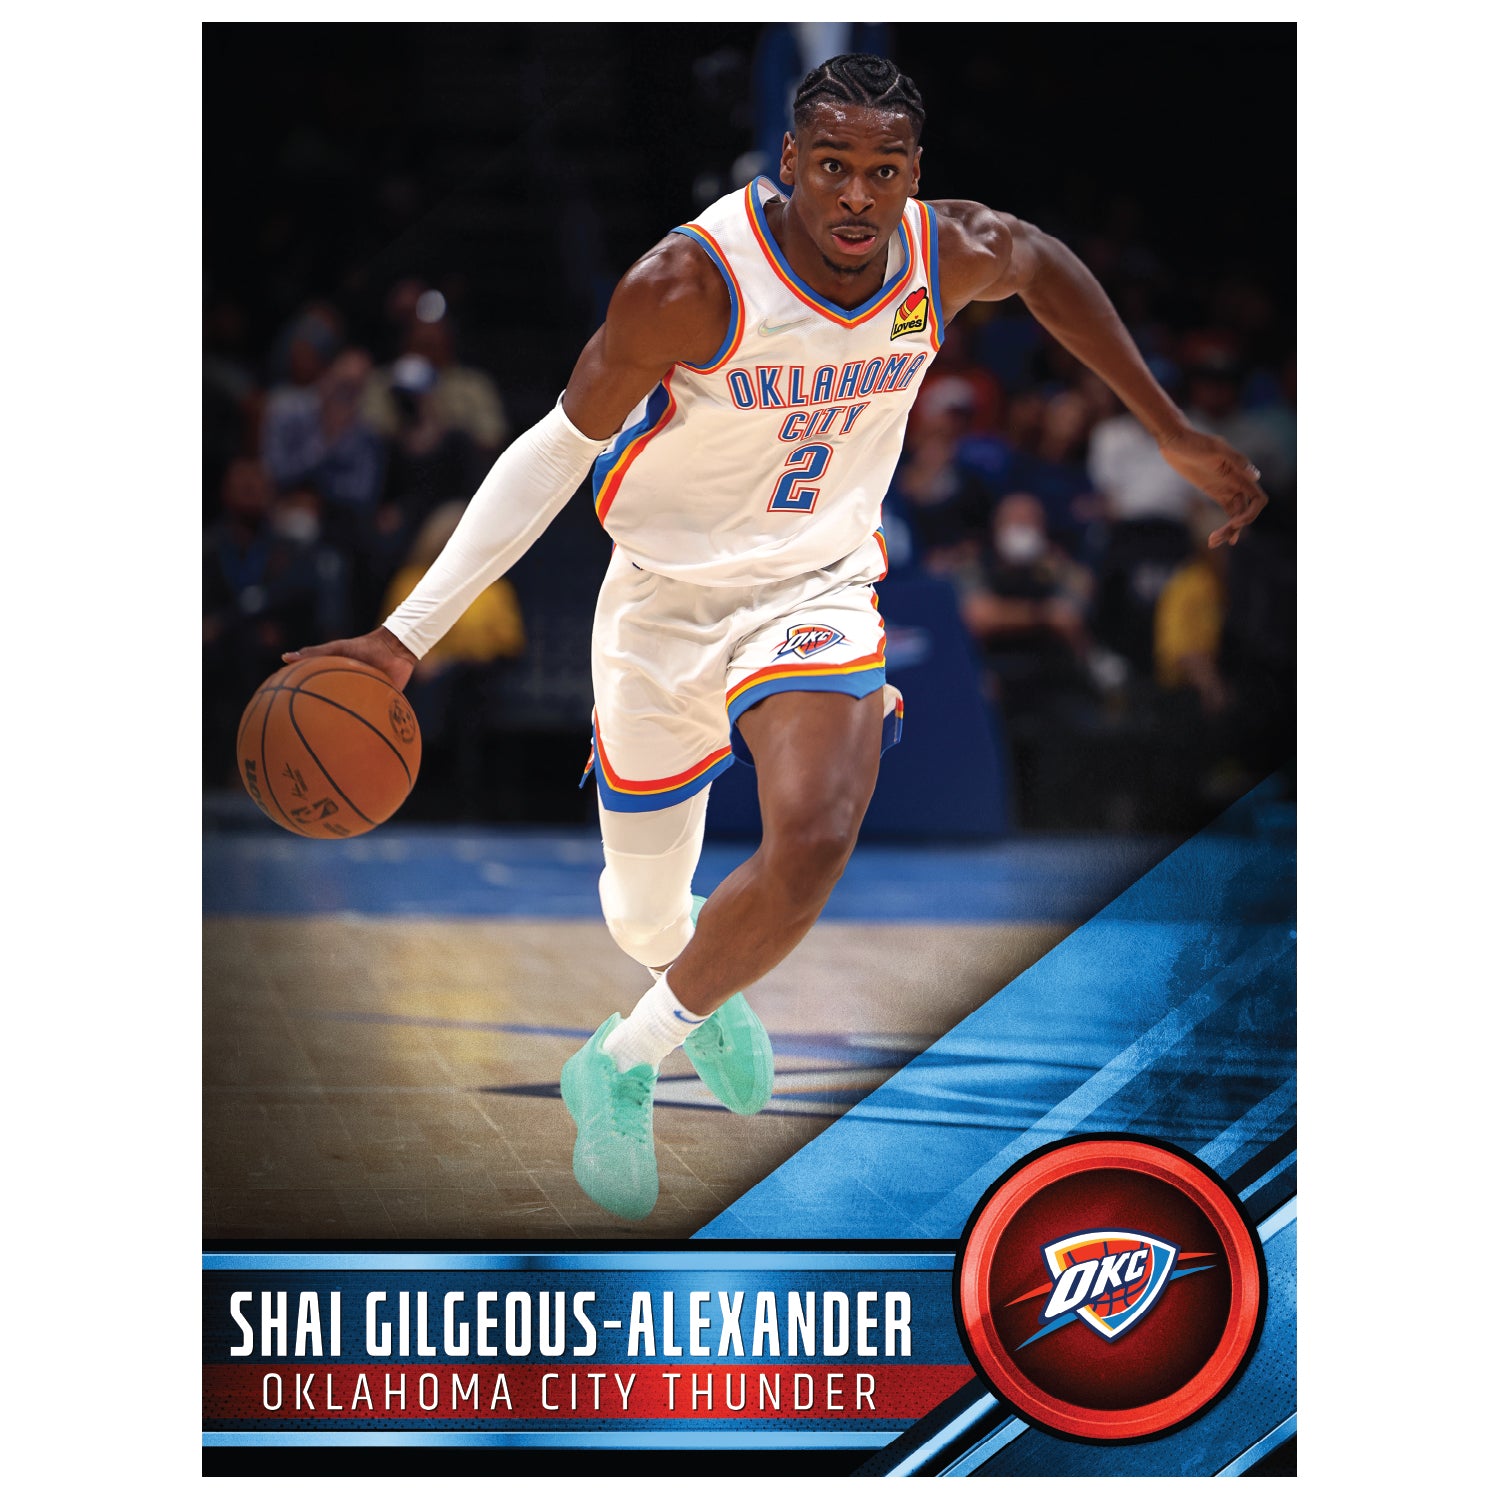 Shai Gilgeous-Alexander Oklahoma City Thunder Jersey for Sale in